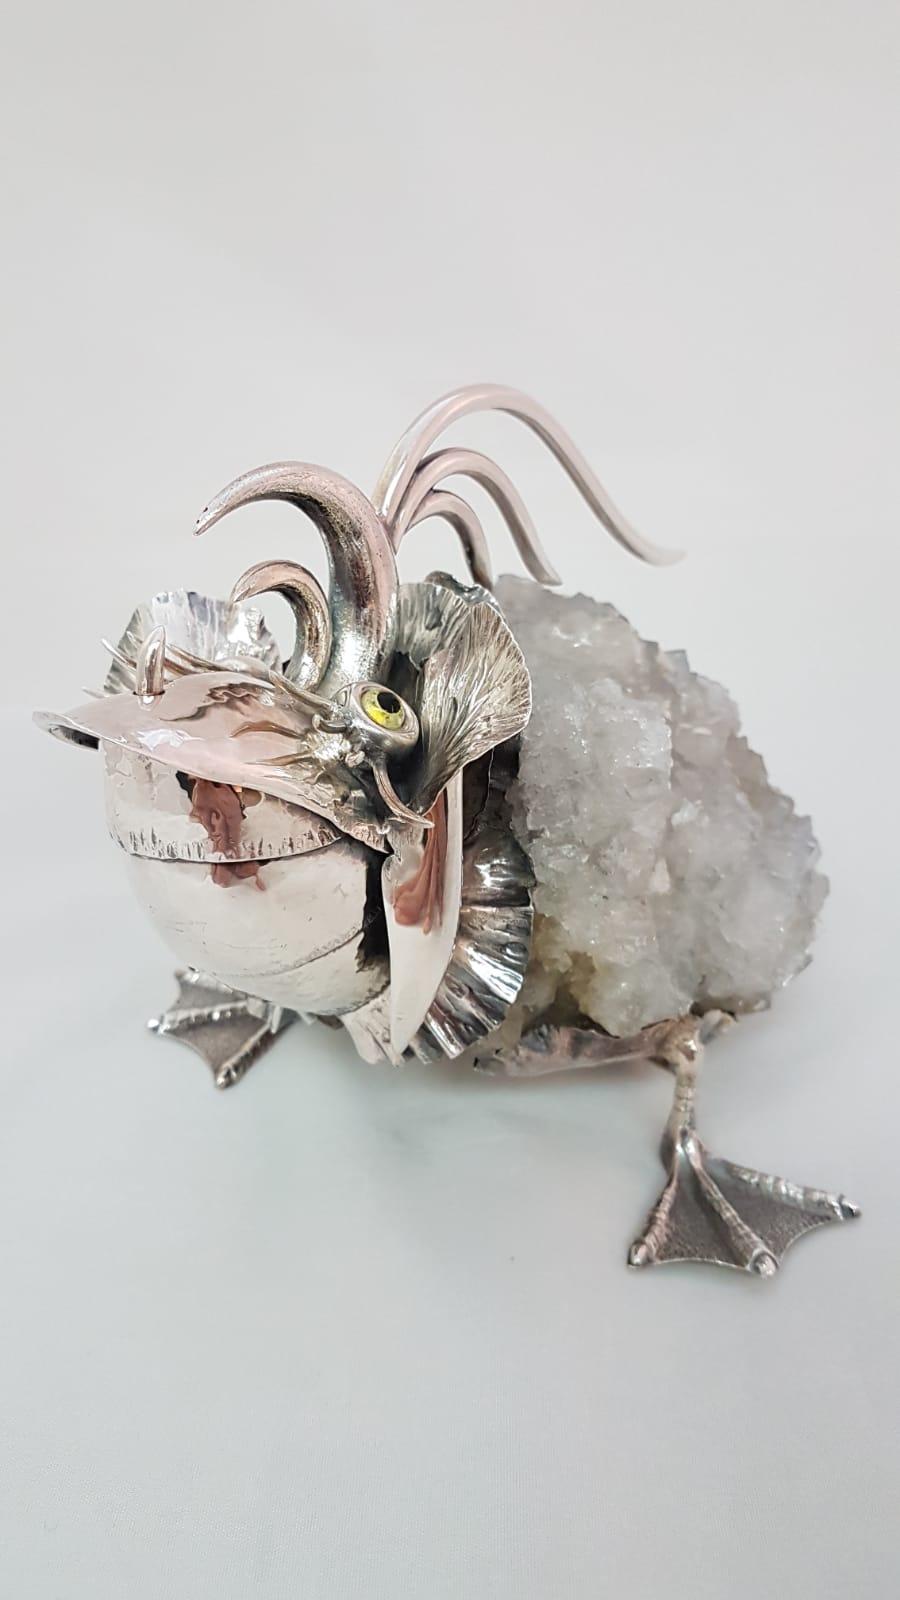 21st Century De Vecchi Sterling Silver Crystal Rock Fantastic Animal Sculpture In New Condition For Sale In Cosenza, IT